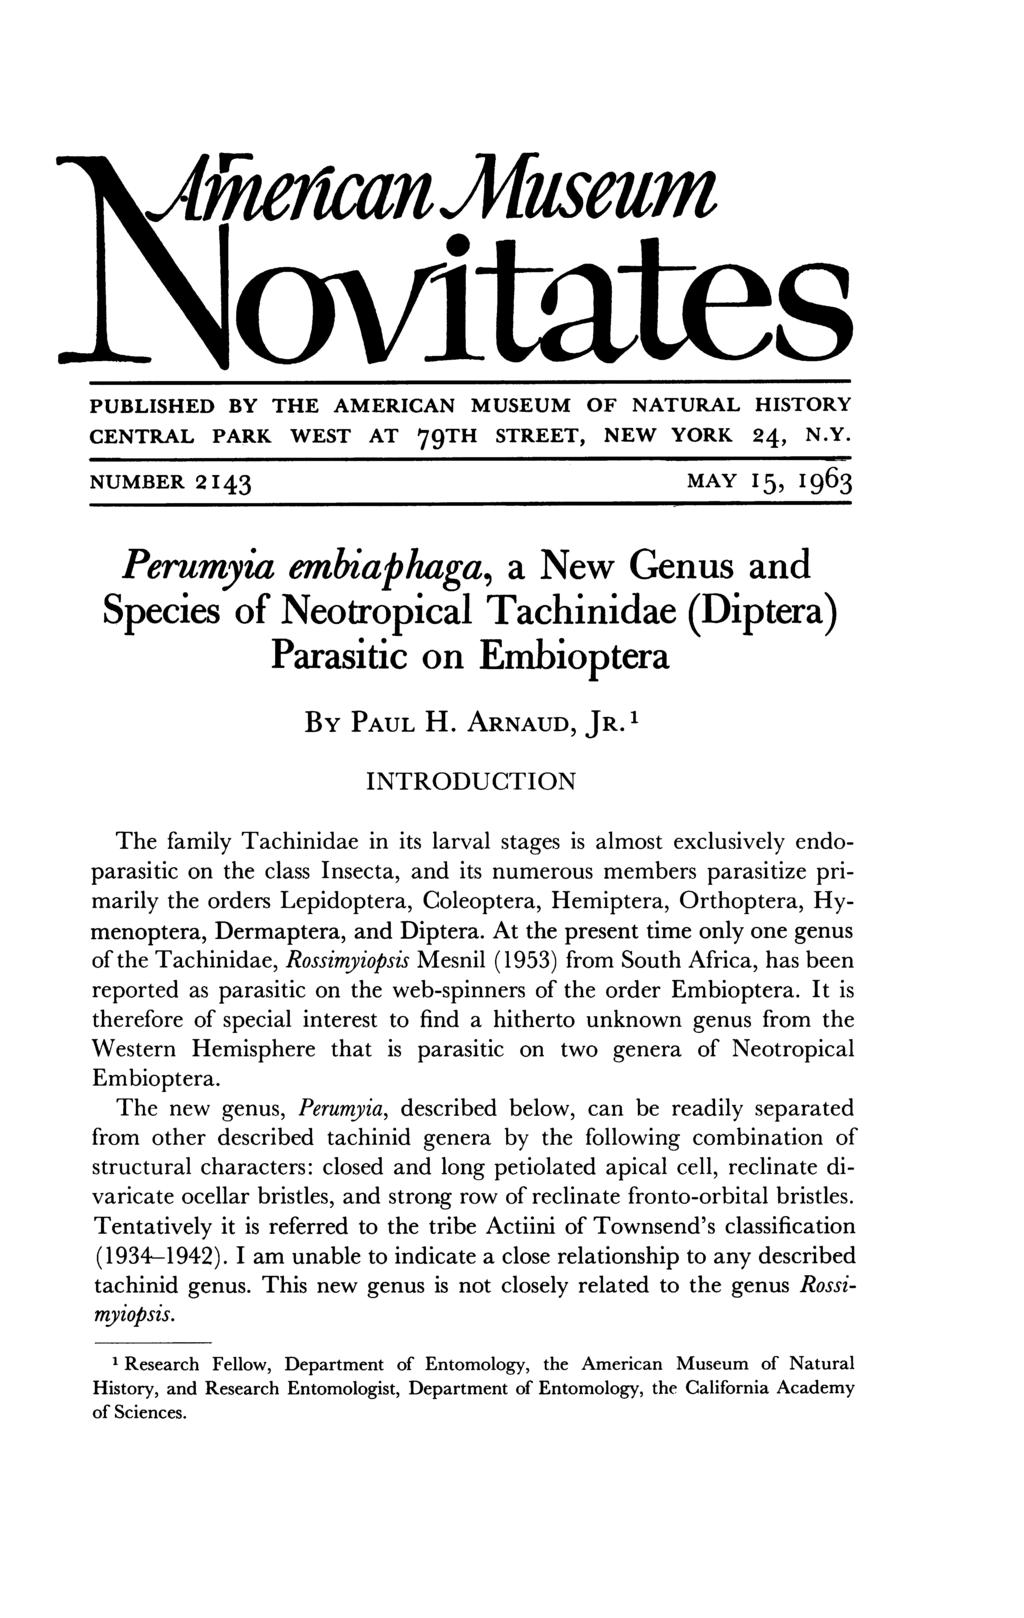 i(aie,icn)jluseum Loviates PUBLISHED BY THE AMERICAN MUSEUM OF NATURAL HISTORY CENTRAL PARK WEST AT 79TH STREET, NEW YORK 24, N.Y. NUMBER 2 I 43 MAY I 5, I 963 Perumyia embiaplhaga, a New Genus and Species of Neotropical Tachinidae (Diptera) Parasitic on Embioptera BY PAUL H.